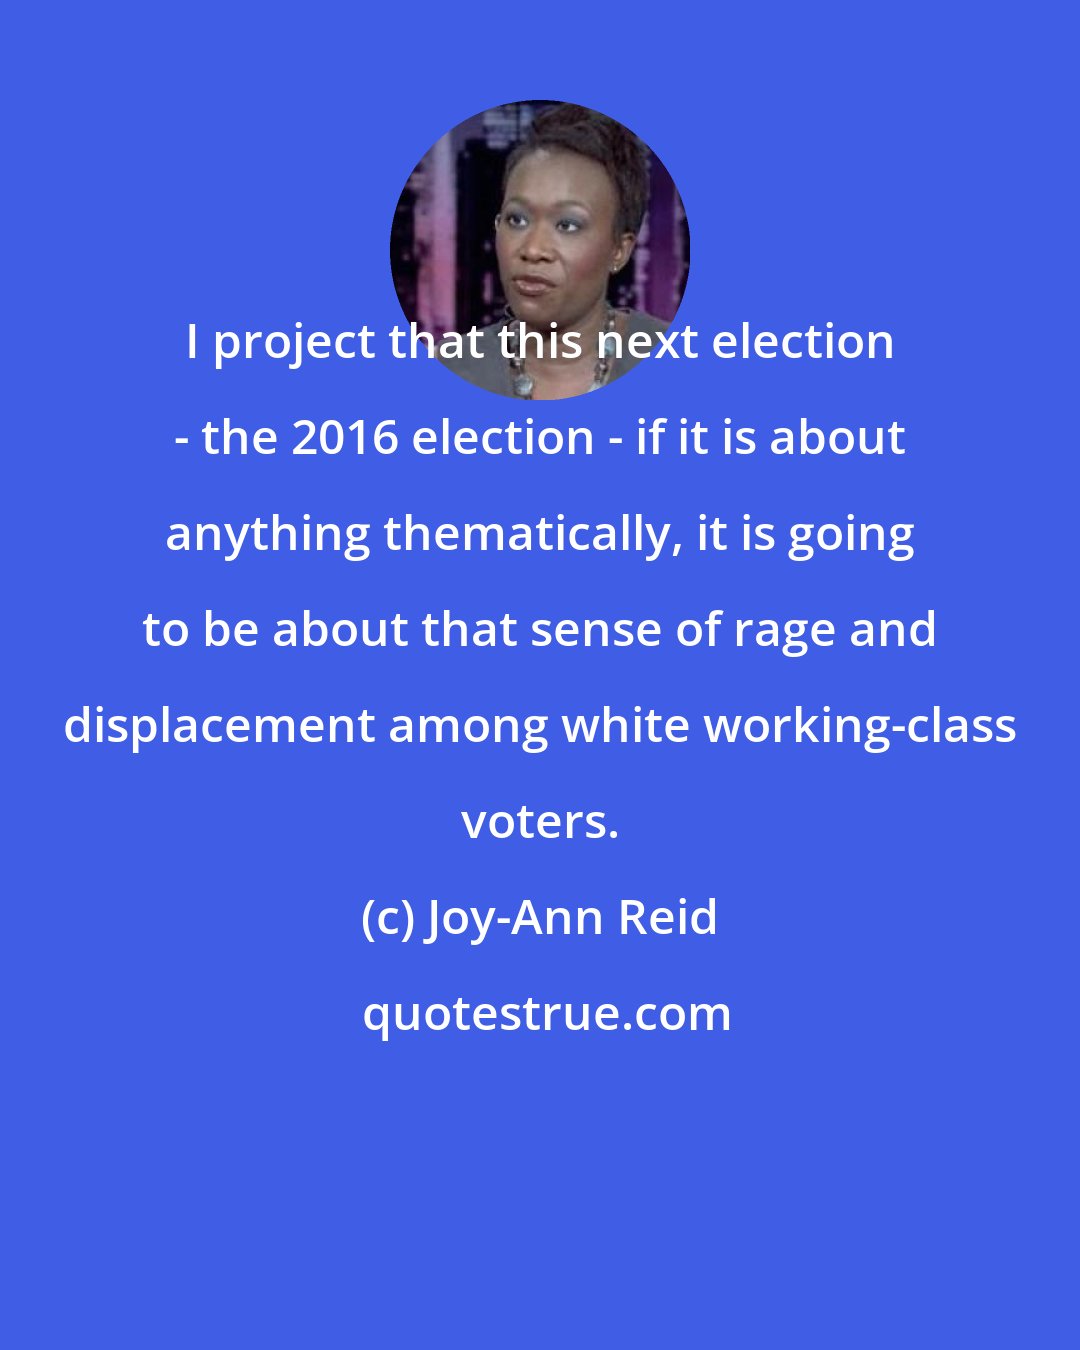 Joy-Ann Reid: I project that this next election - the 2016 election - if it is about anything thematically, it is going to be about that sense of rage and displacement among white working-class voters.